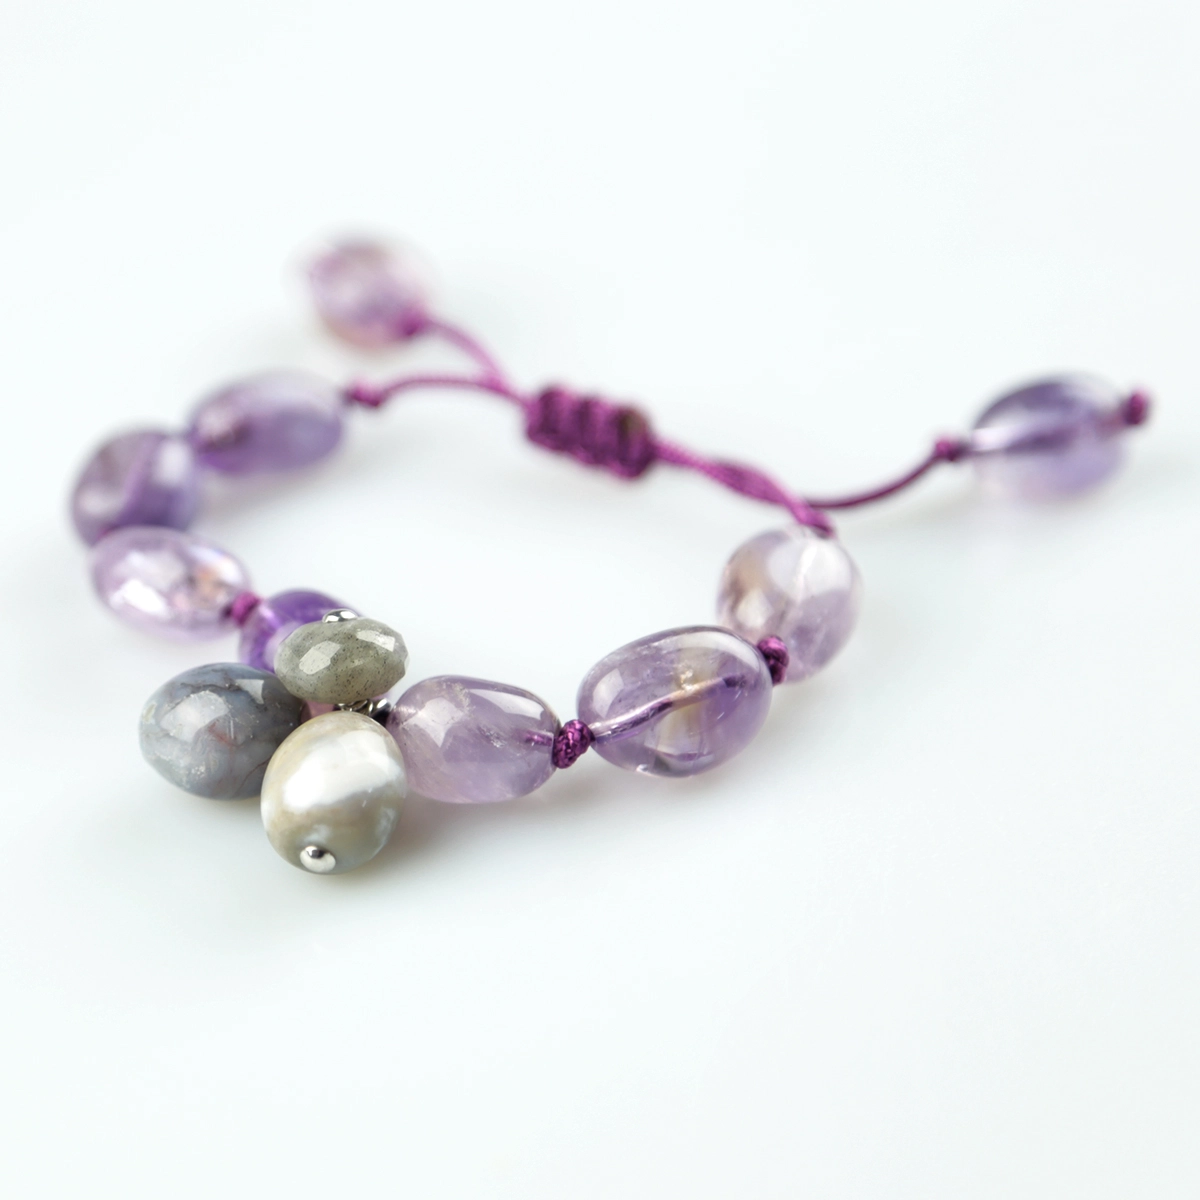 BRACELET KNOTTED AMETHYST WITH PENDANTS BUPU235 PATRICIA GARCIA